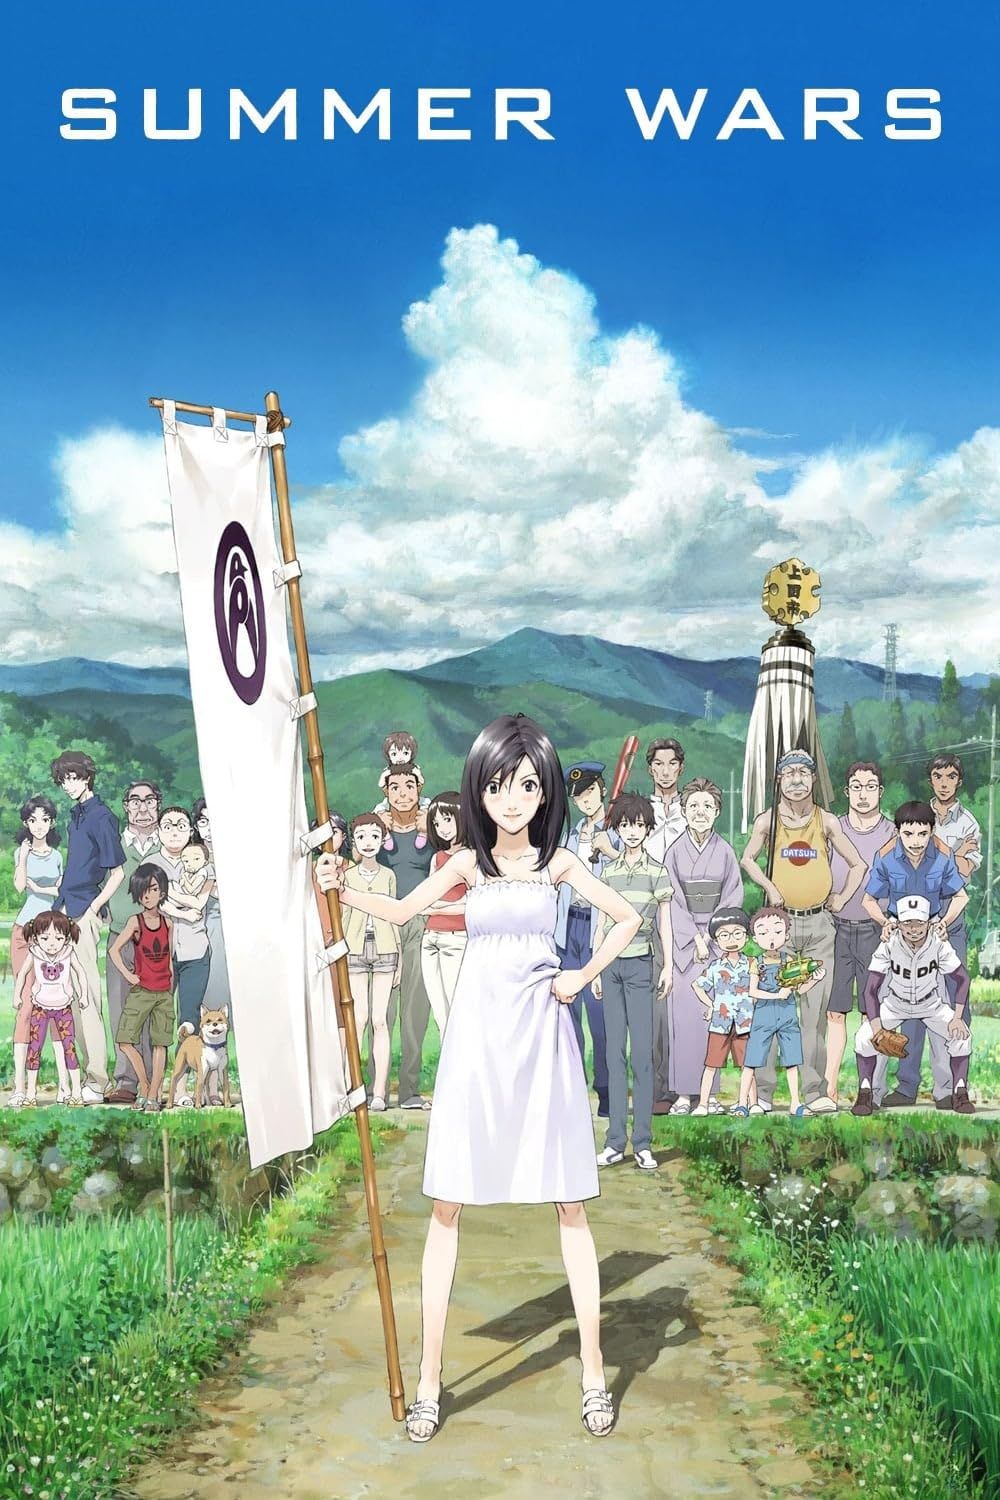 Natsuki Shinohara and the others in Summer Wars (2009)